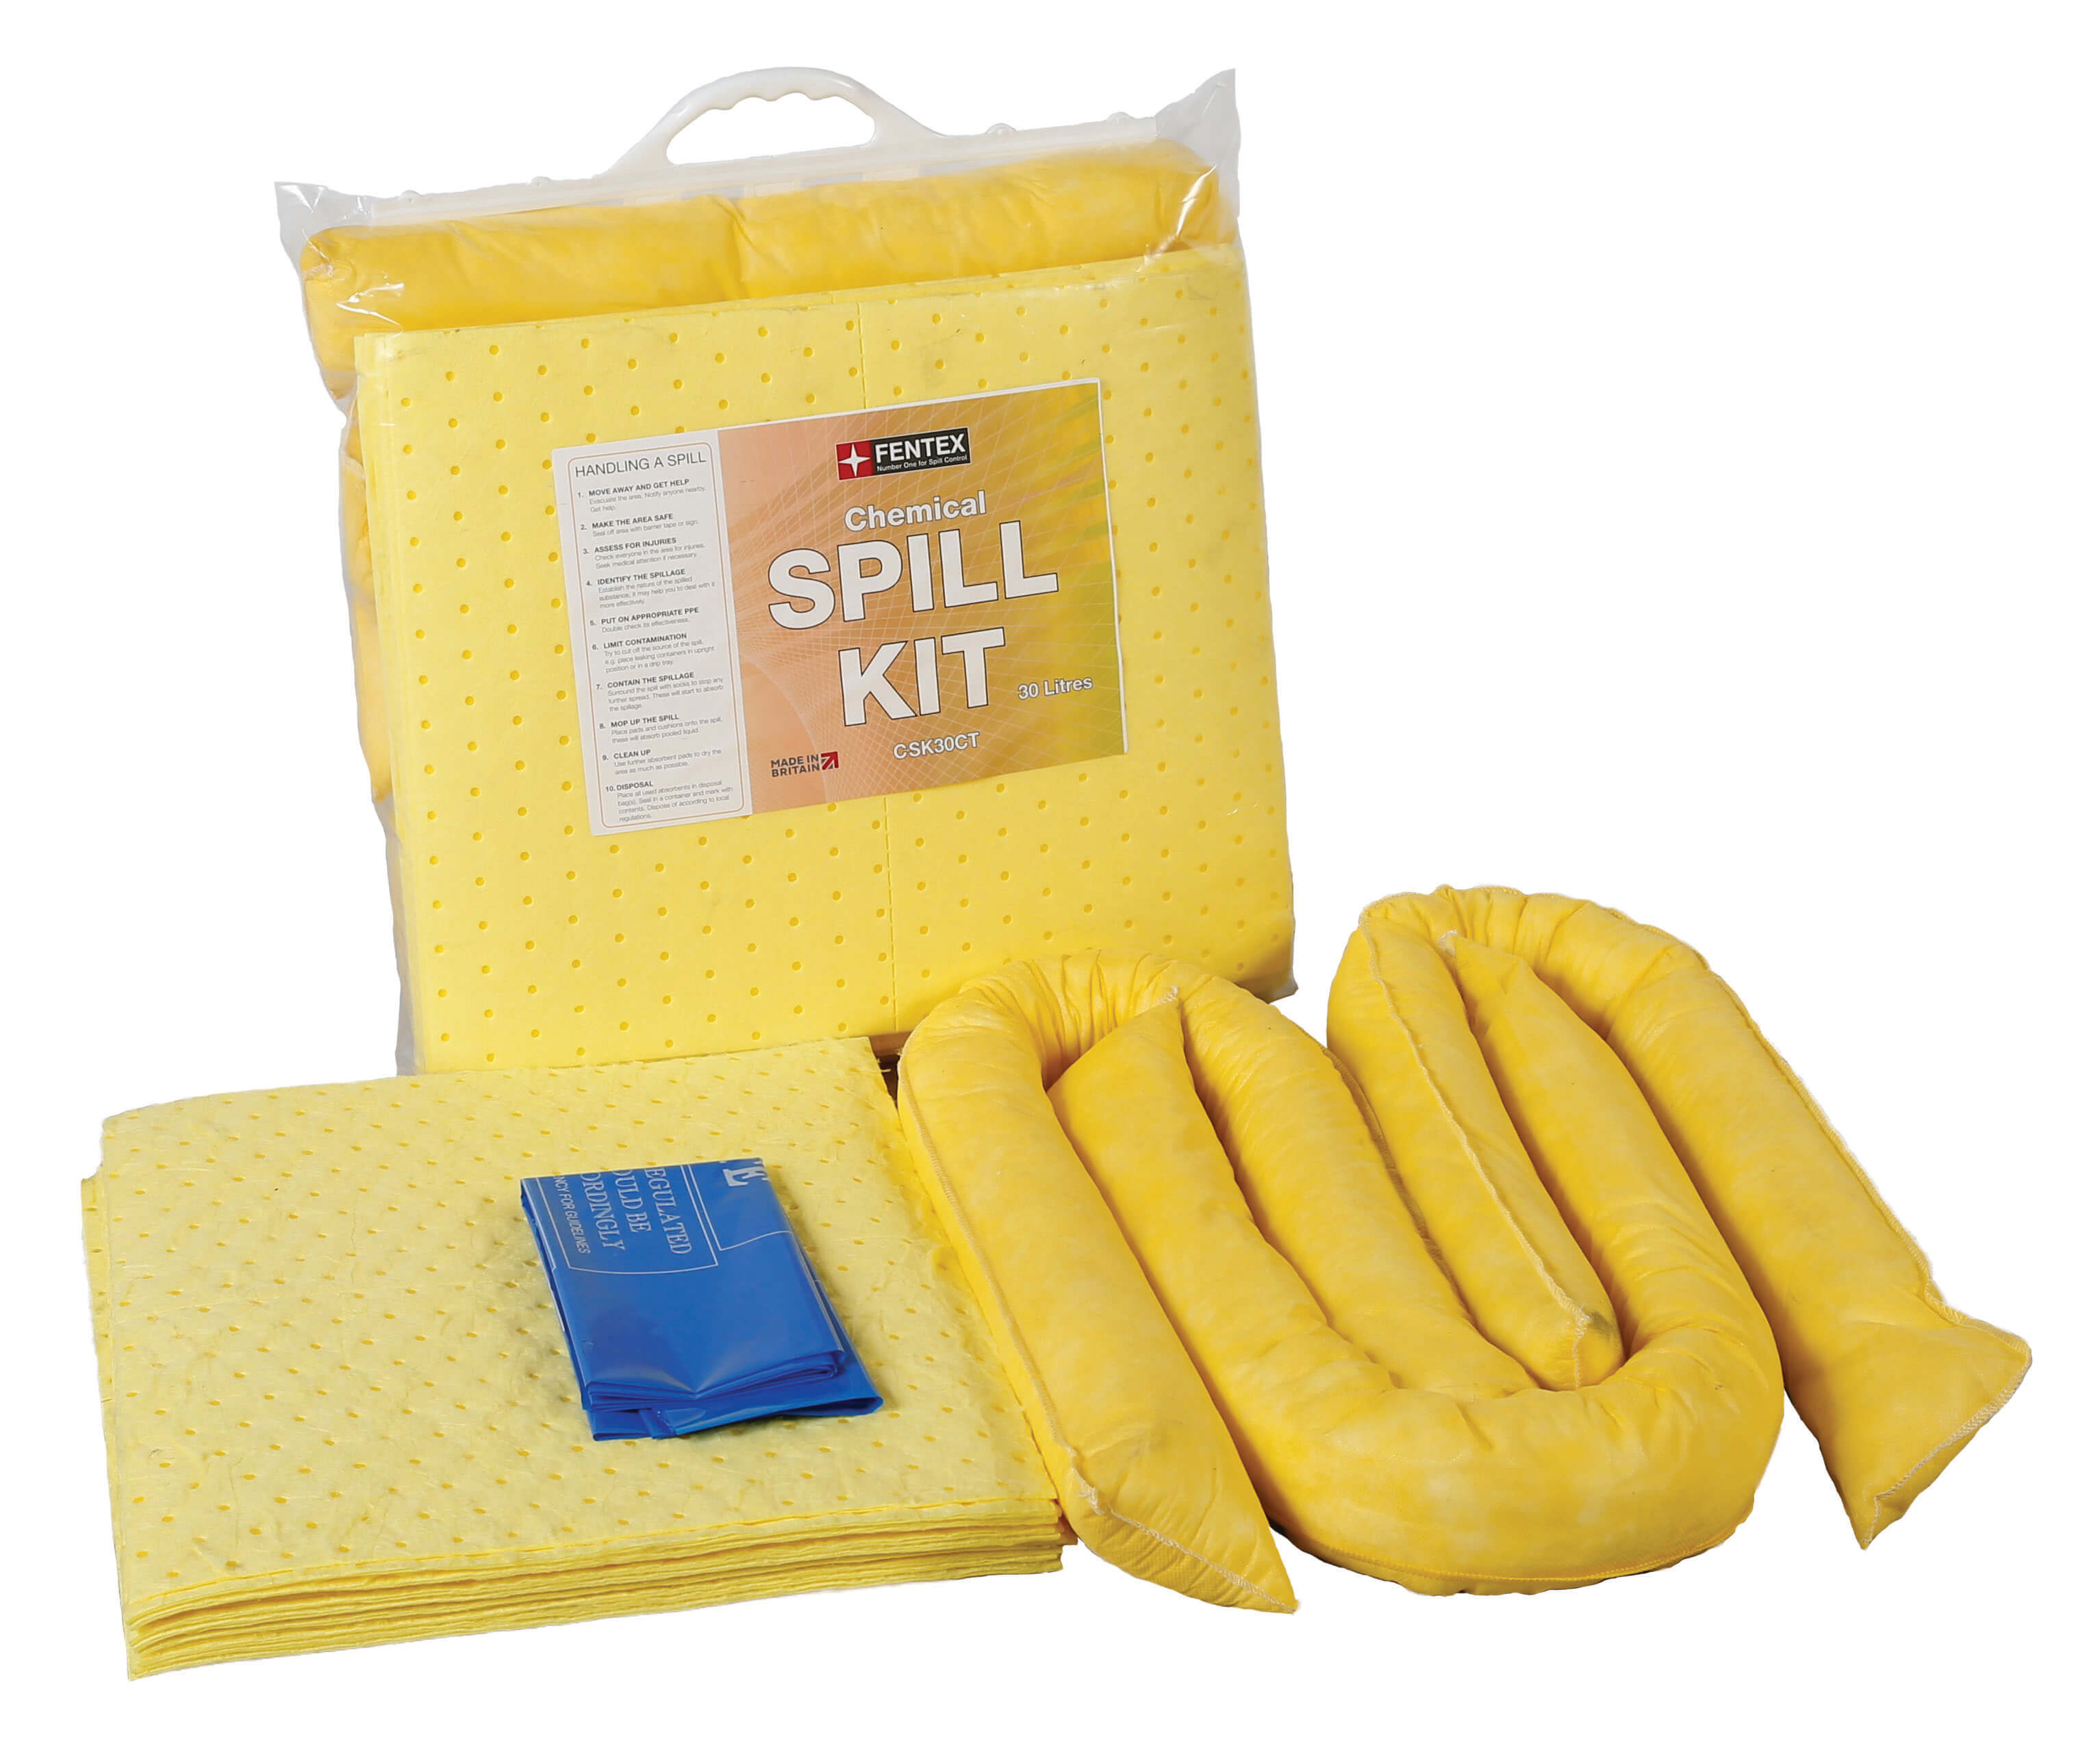 Chemical Spill Kit in Clip-top Bag